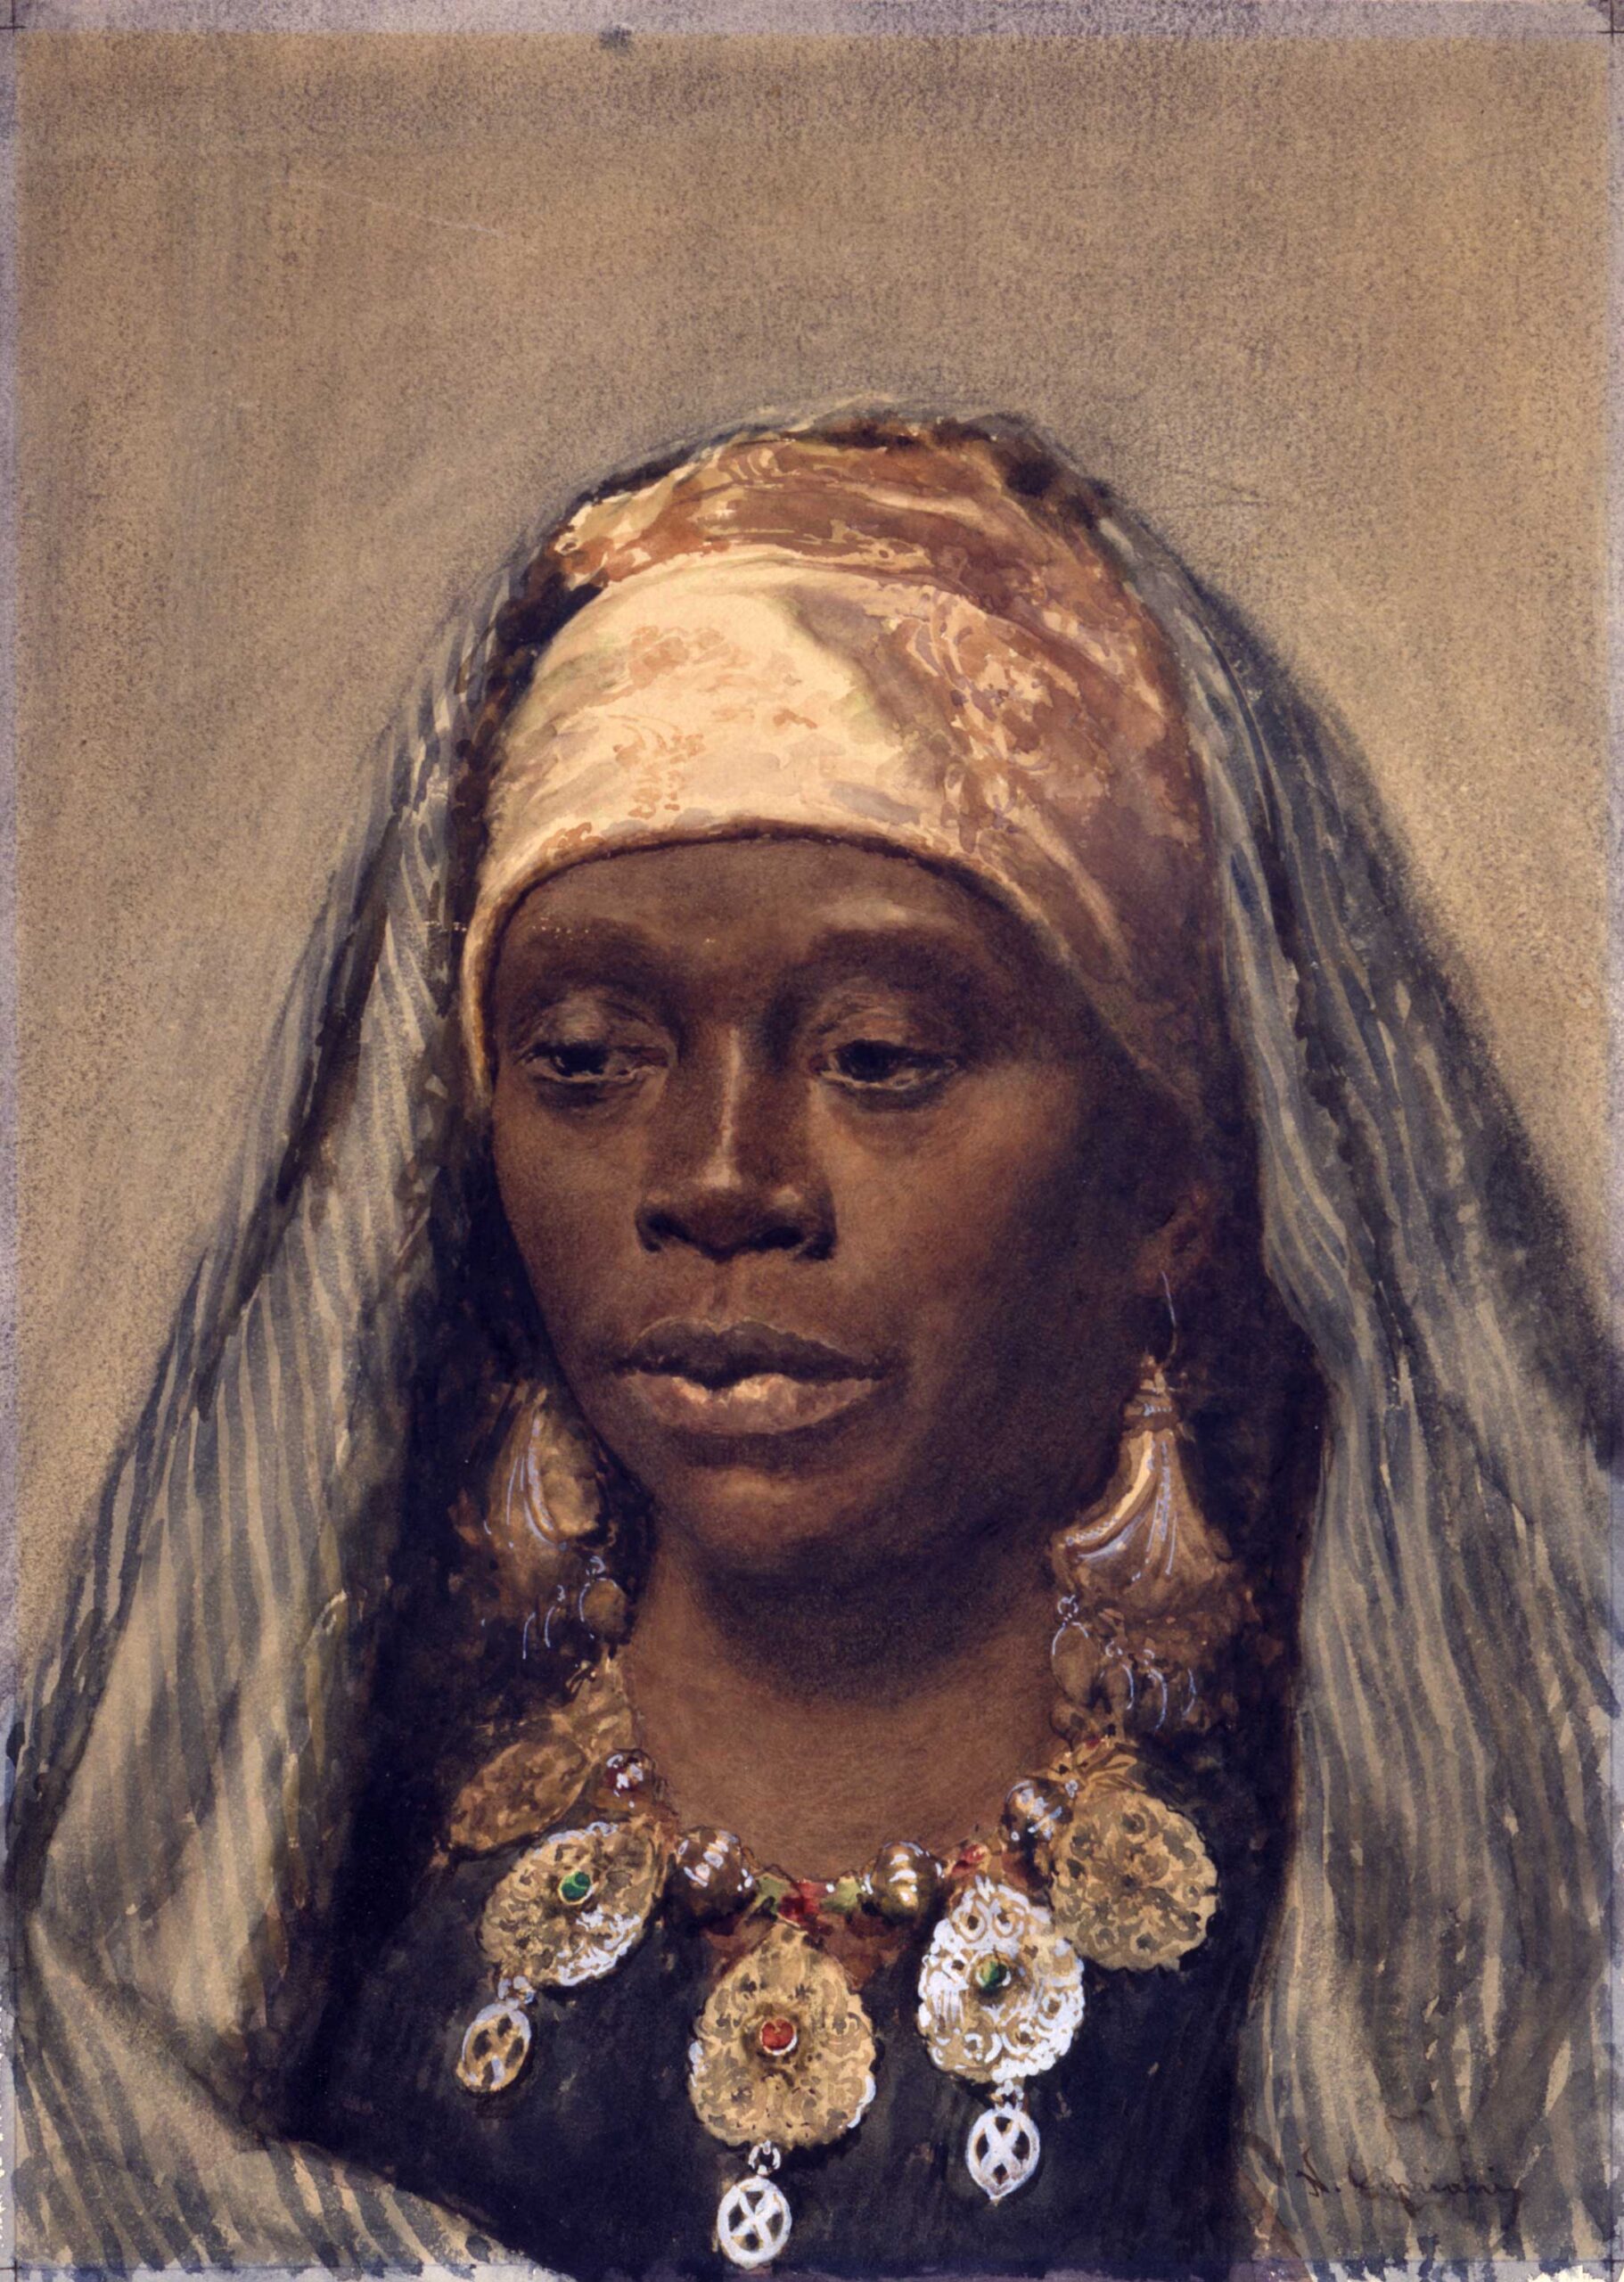 Nazzareno Cipriani (1843-1925), "Head of a North African Woman," 19th century, watercolor over traces of pencil on paper, 15 x 11 in., Dahesh Museum of Art, New York, 1995.49